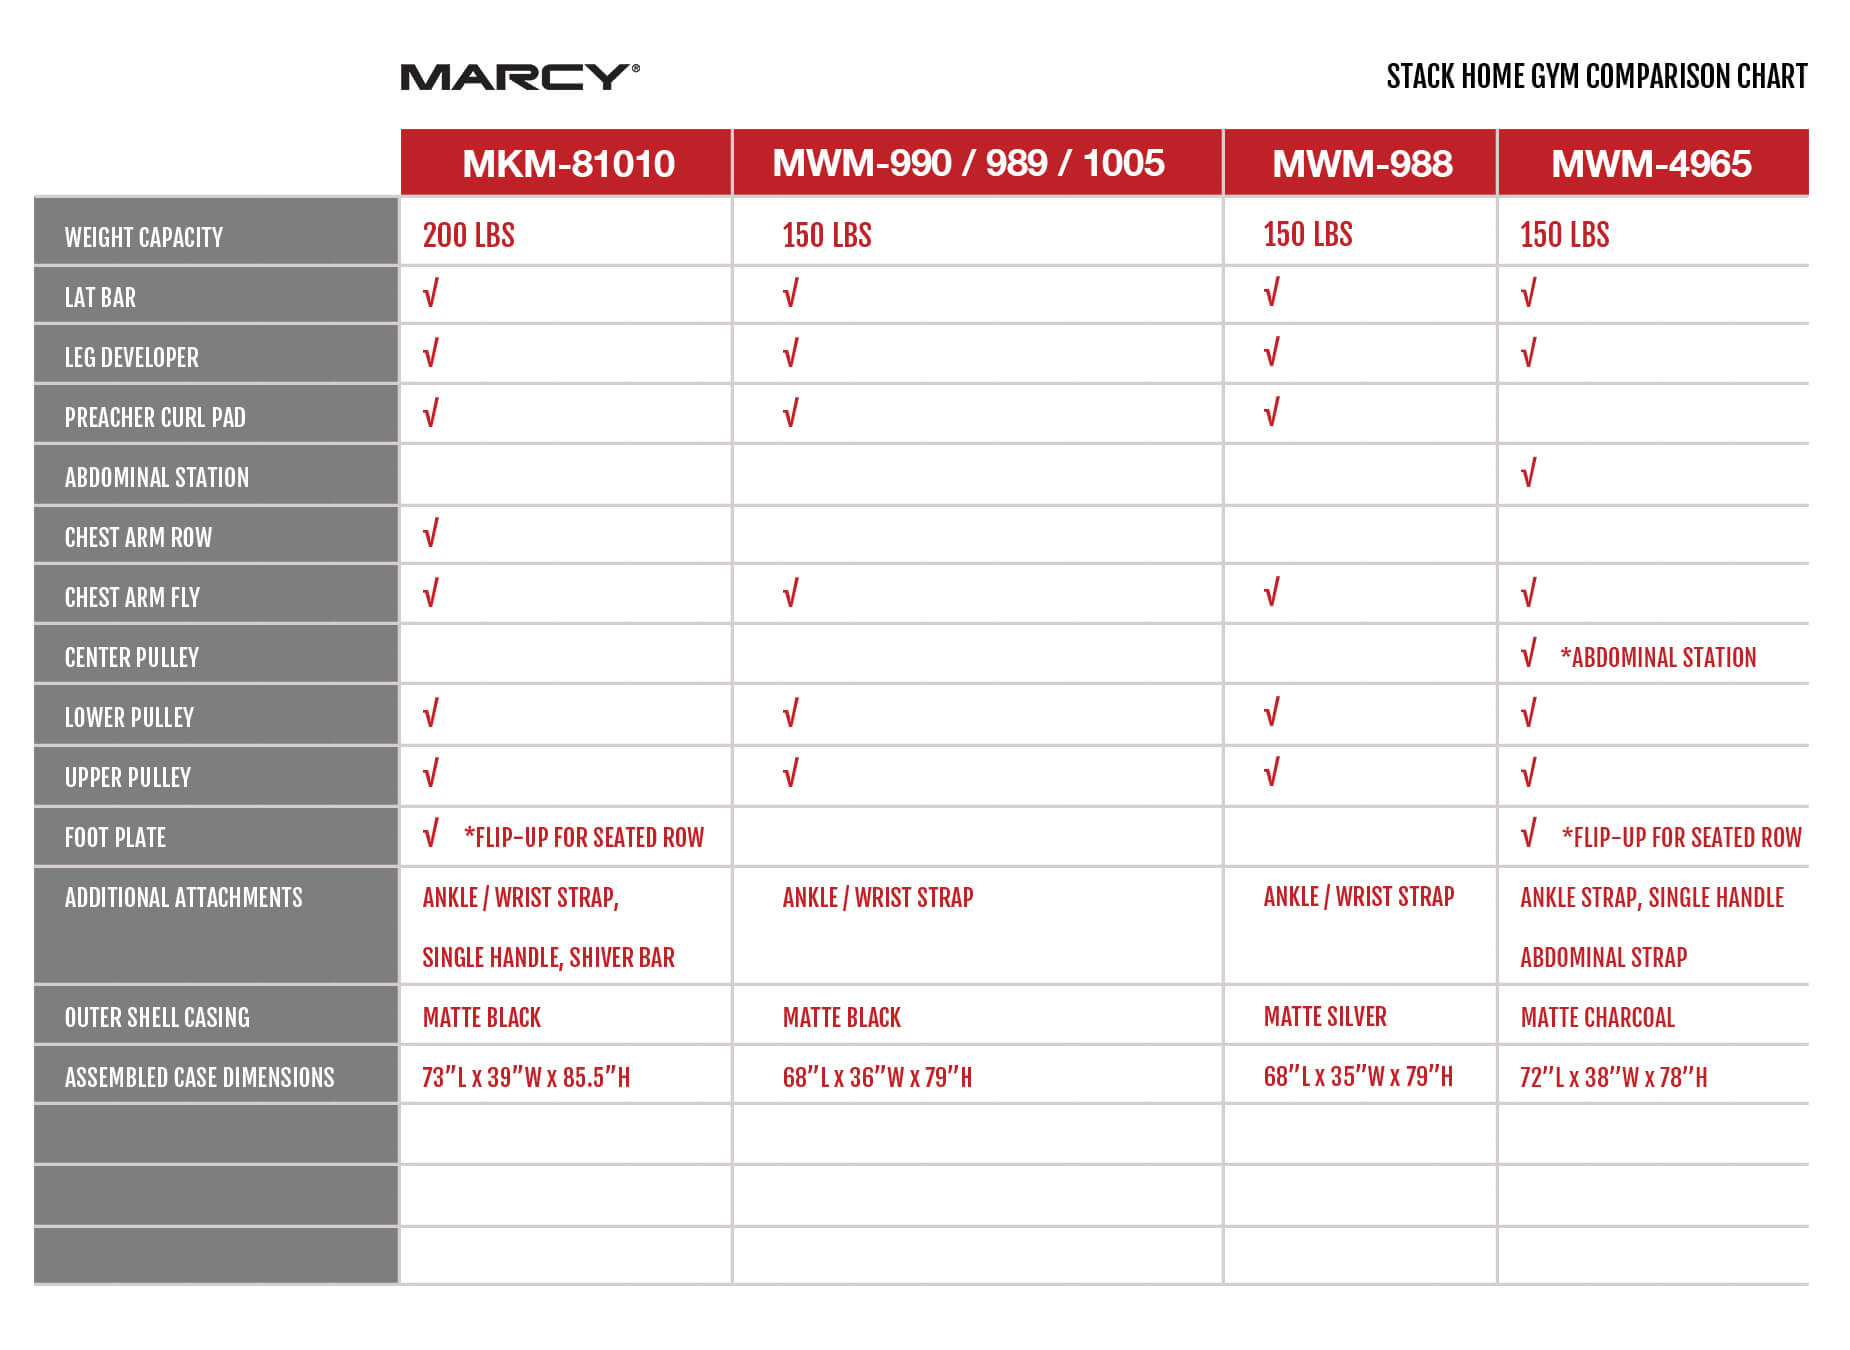 stack-weight-home-gym-comparison-chart-marcy.jpg